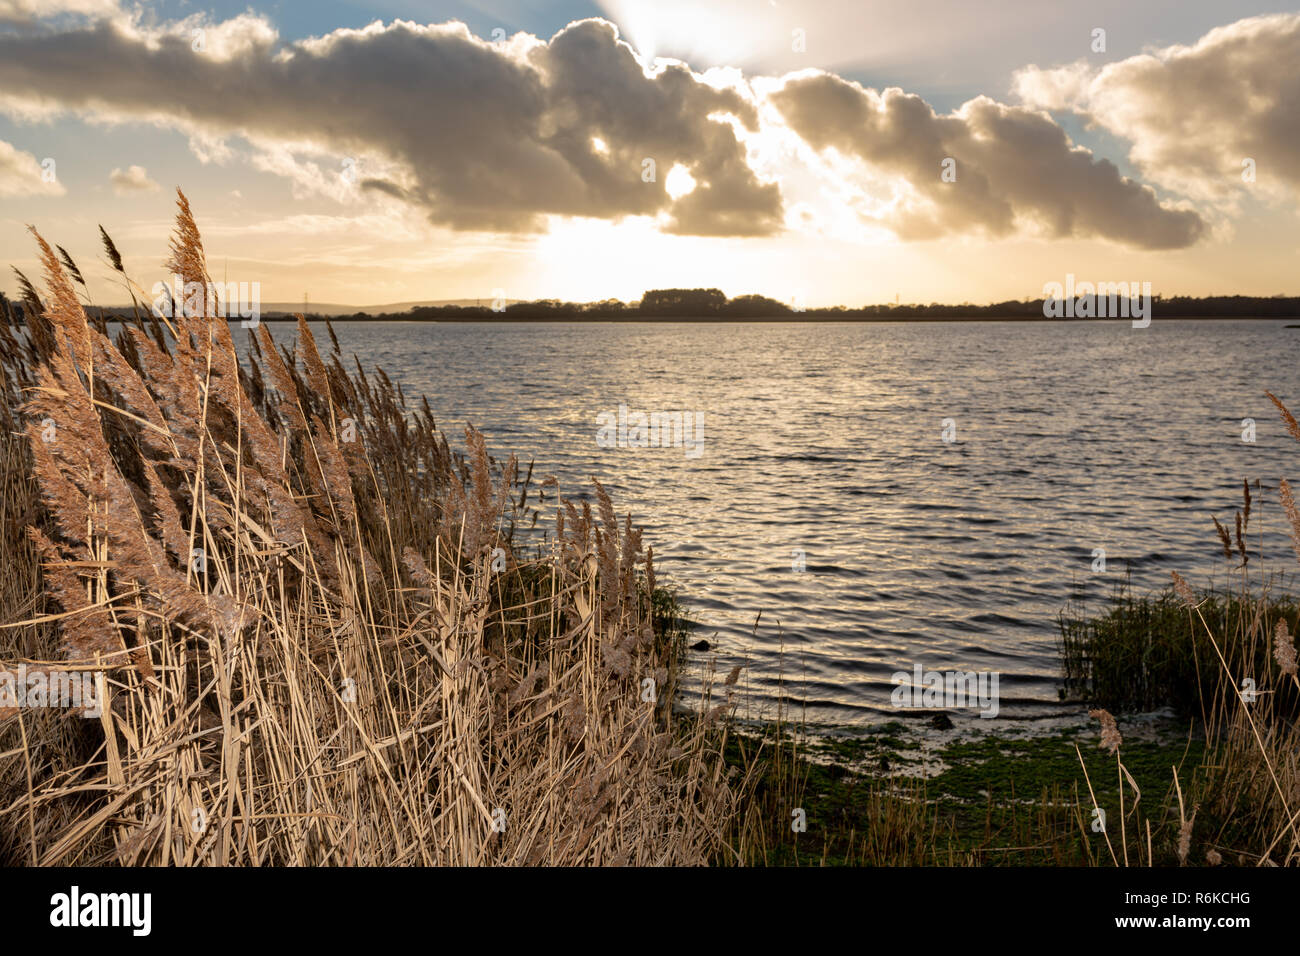 Landscape photograph with illuminated reeds in foreground and gently rippling water in background under a dramatic golden sky. Stock Photo